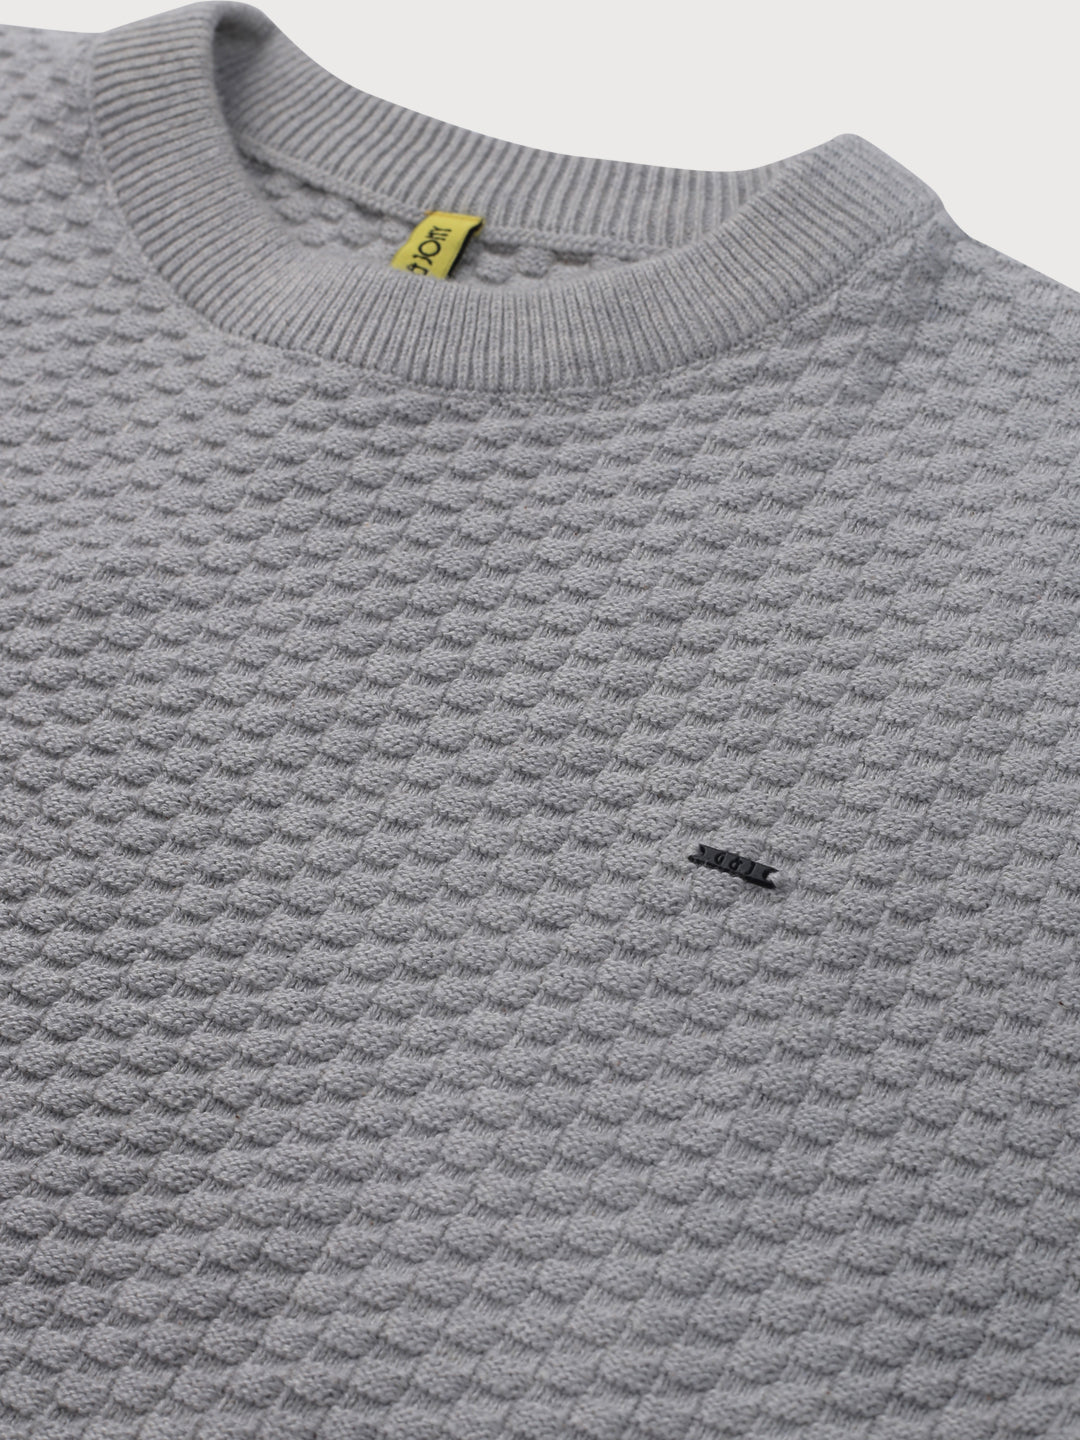 Boys Grey Solid Woven Sweater